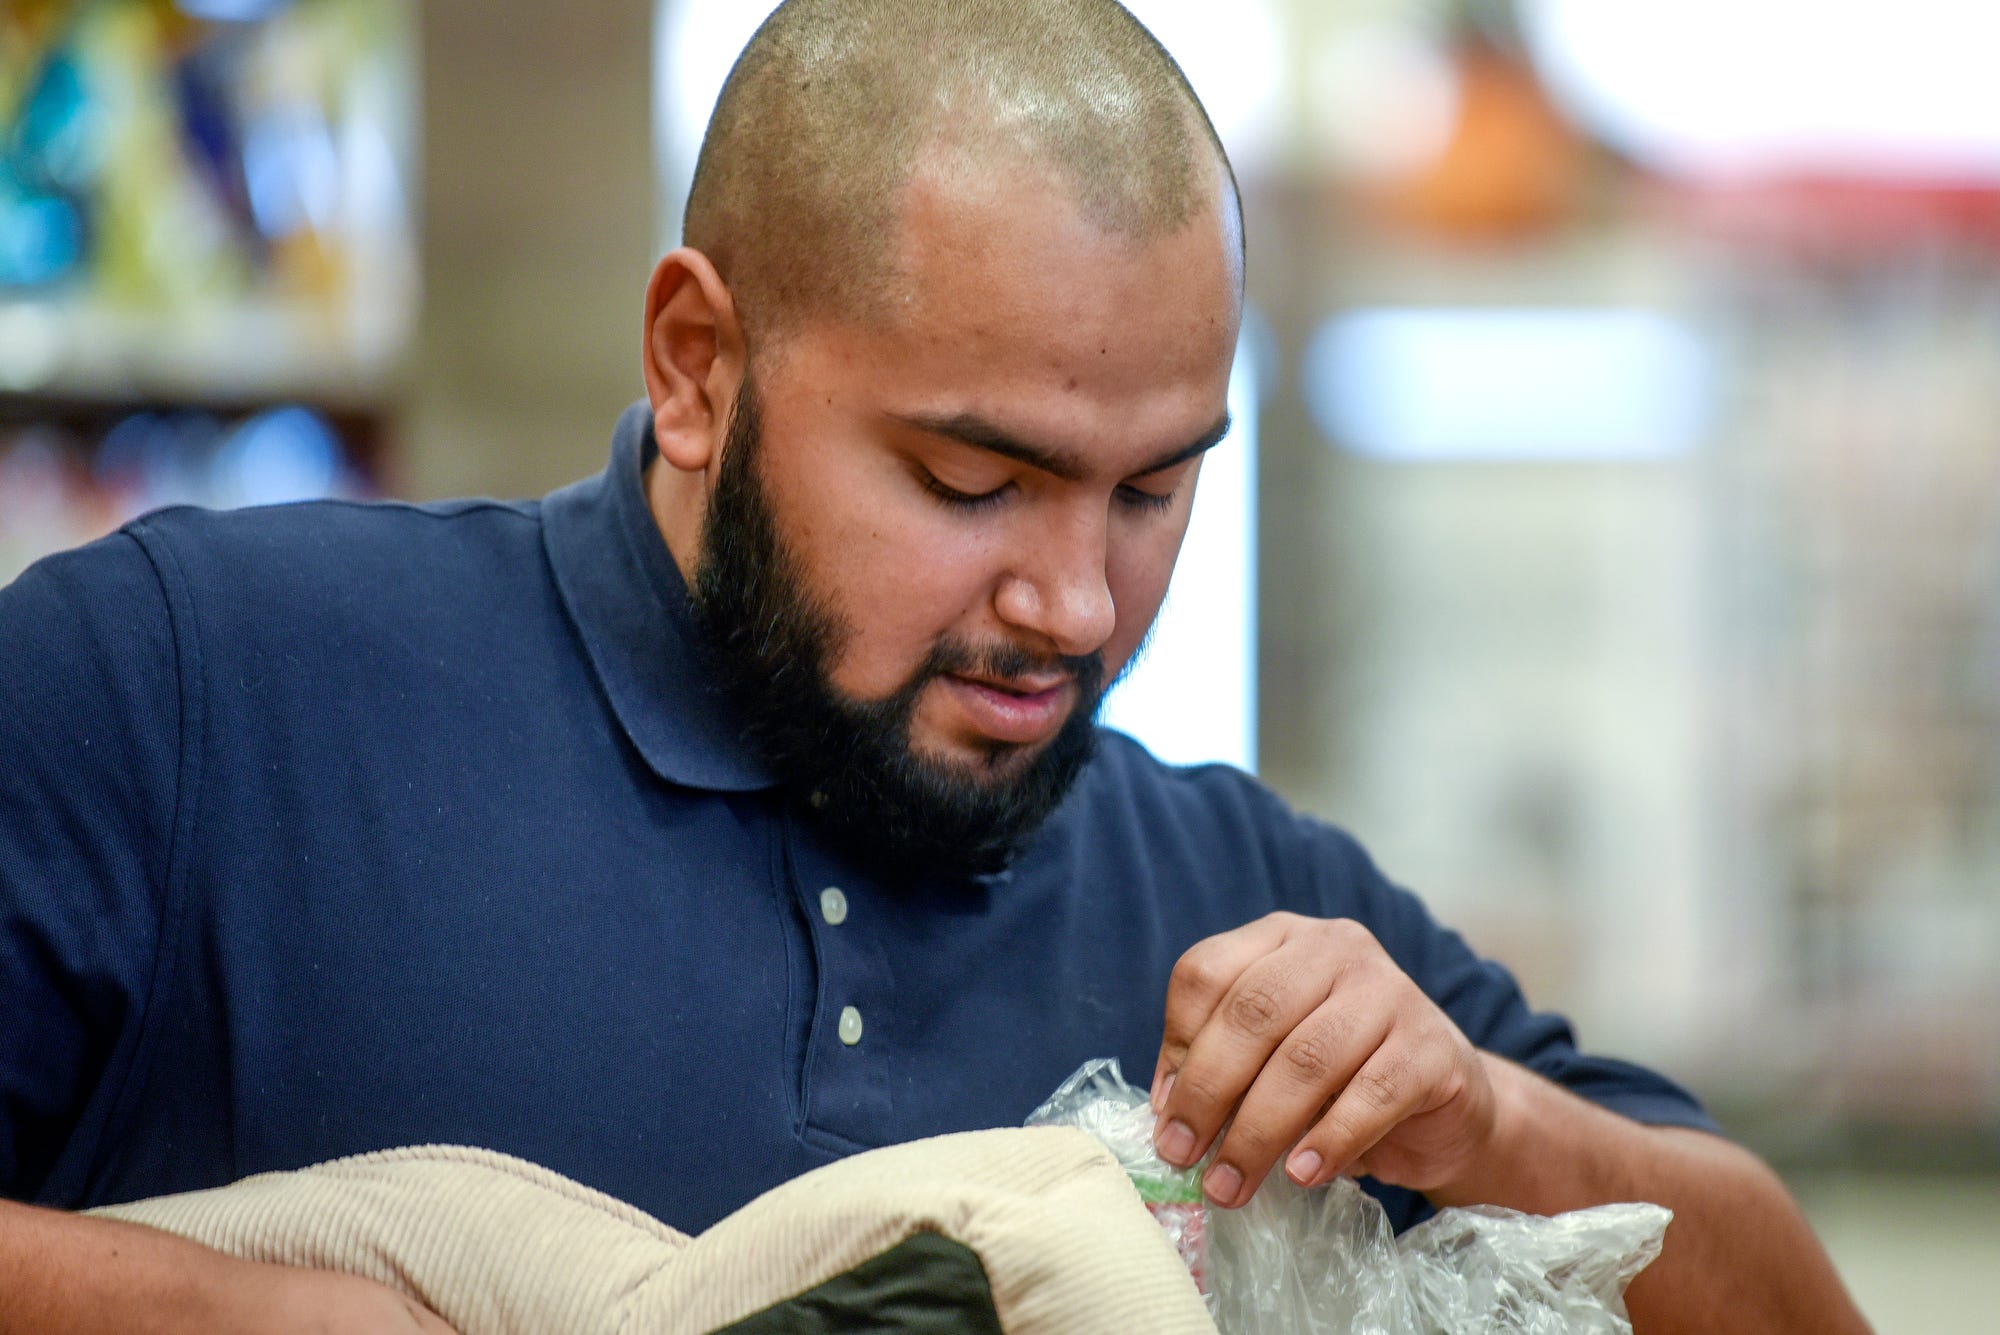 Benito Flores, 25, works on unpacking boxes for another employee while working a shift on Thursday, Oct. 3, 2019, at the Rite Aid in East Lansing. Flores is working two jobs to help out with his $10,000 in student debt.